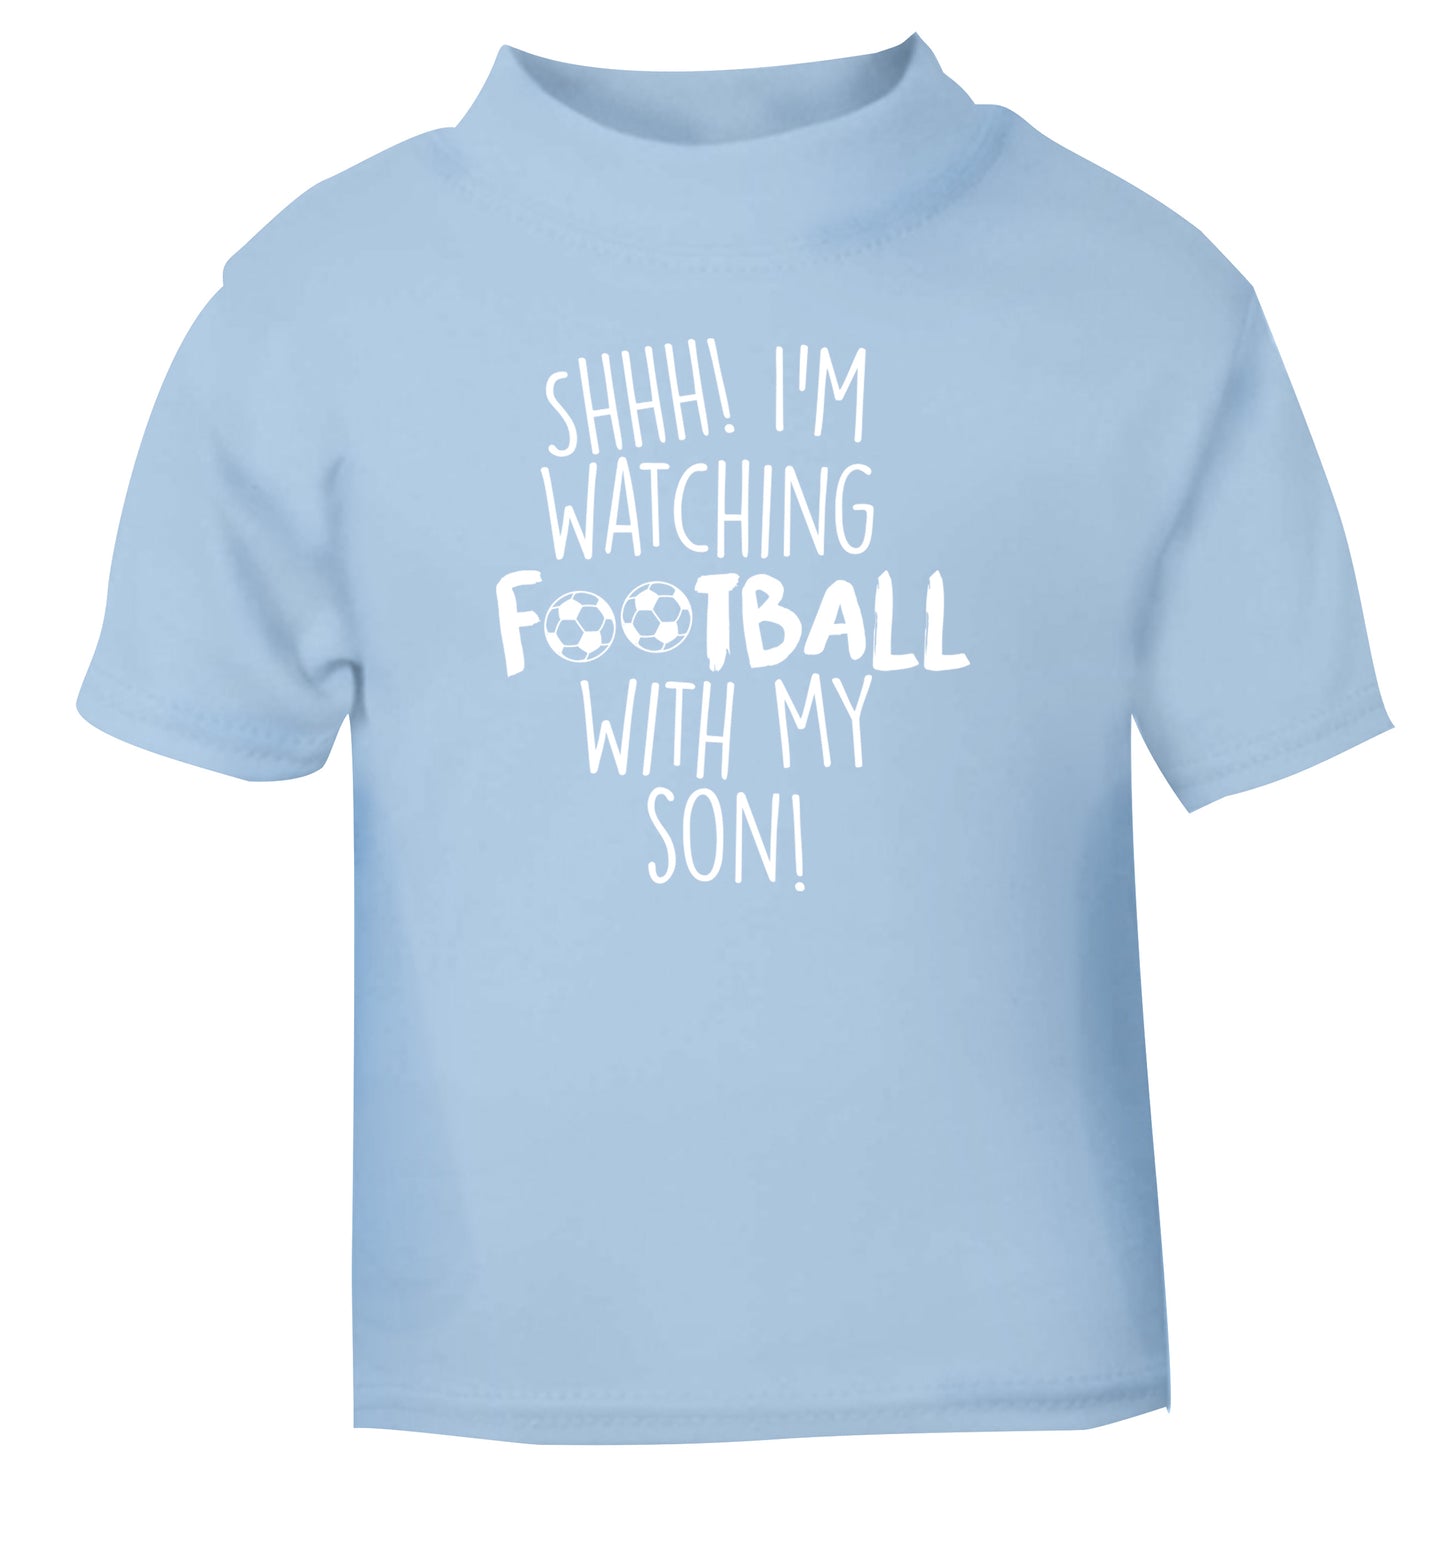 Shhh I'm watching football with my son light blue Baby Toddler Tshirt 2 Years